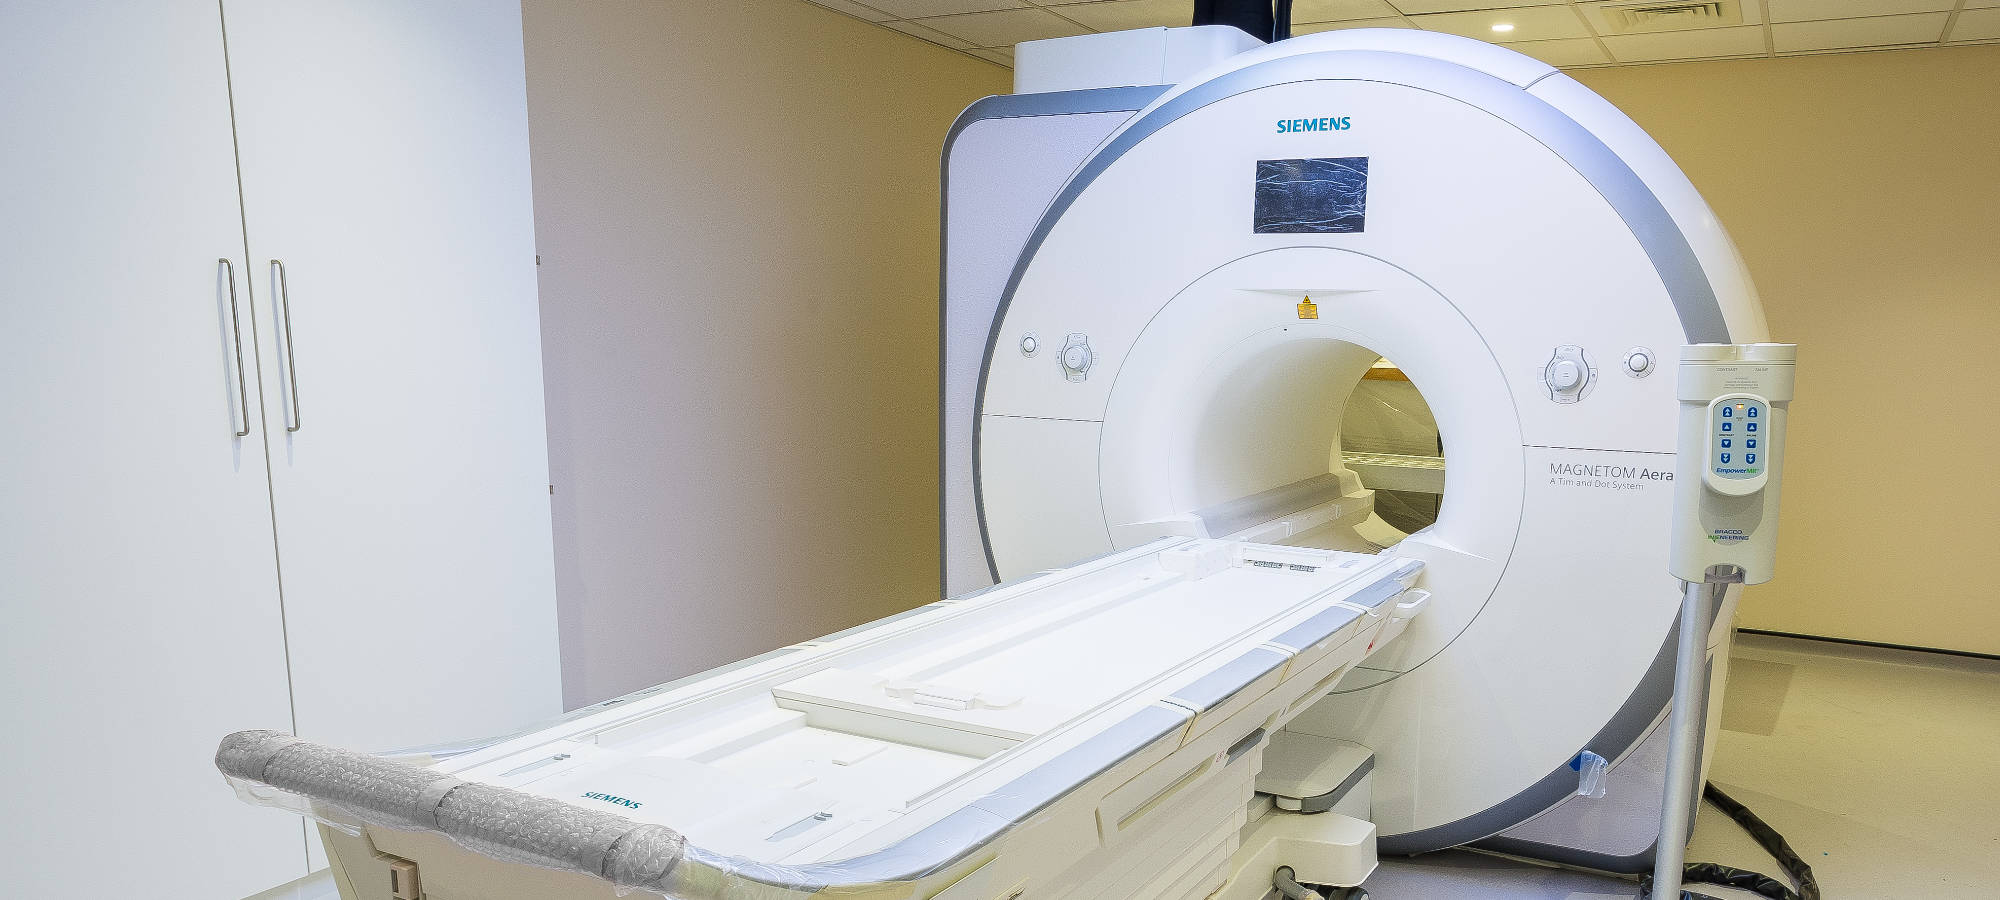 Imaging Matters installed Siemens MRIs at Conquest Hospital